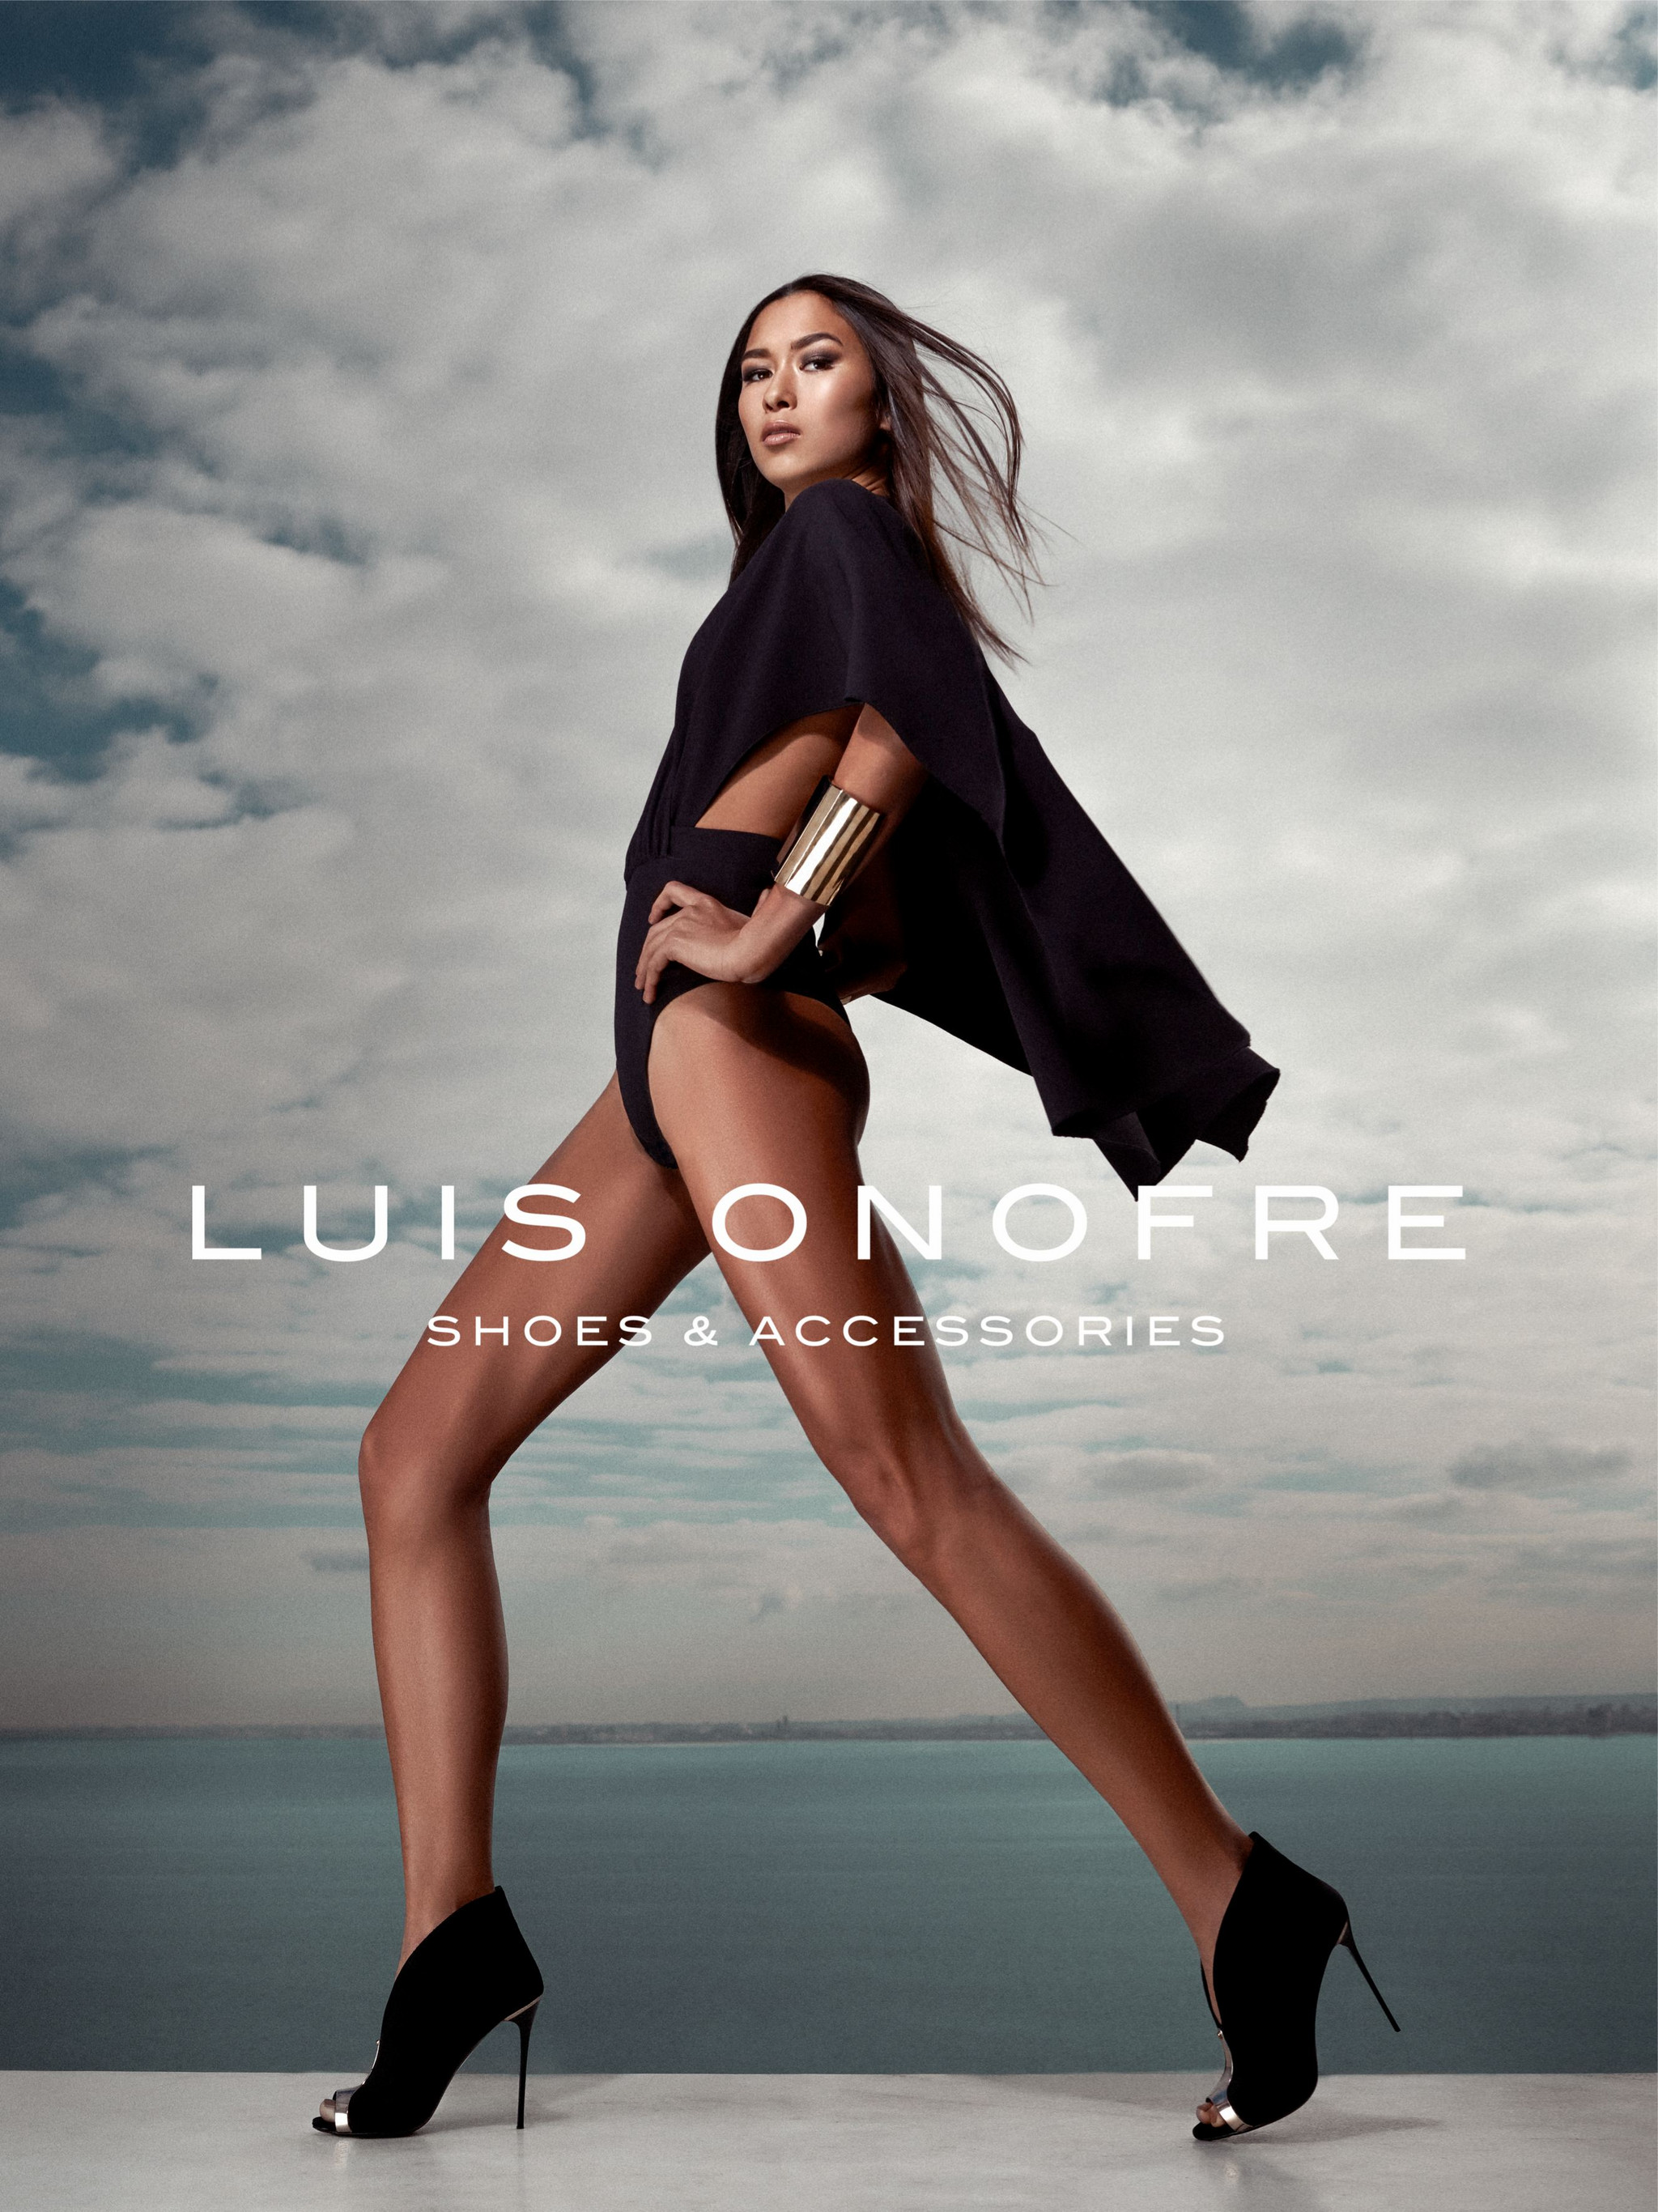 LO_LUIS ONOFRE CAMPANHA SS15_01LOW.jpg